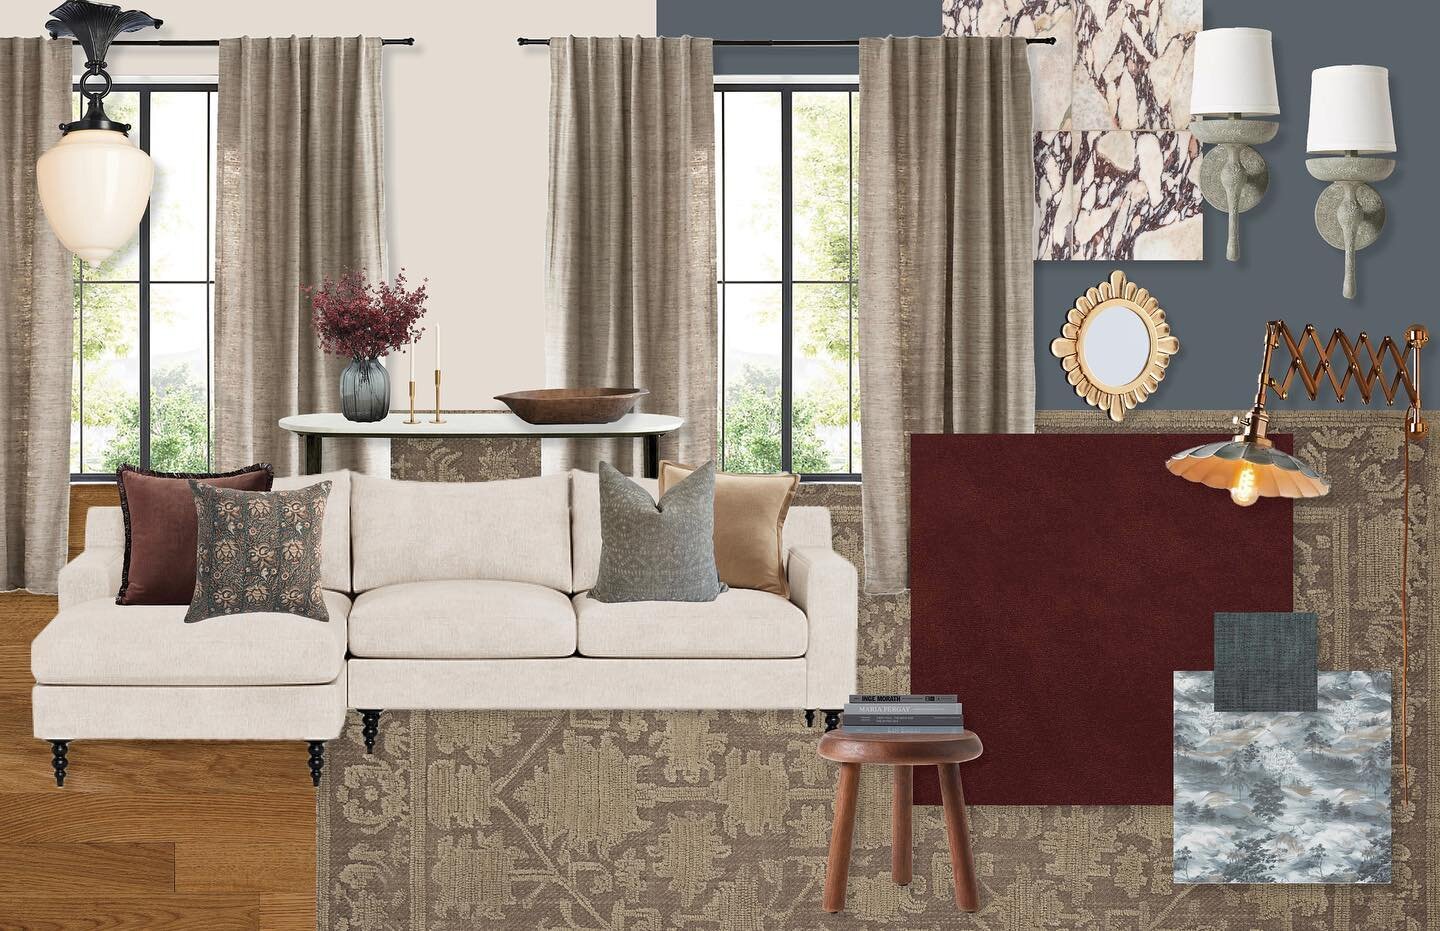 A moment for jewel tones on this Moodboard Monday 💎✨

Swipe to see an example of the floor plan and renders provided in our full service design packages!

.
.
#louisvilleinteriordesign #louisvilleinteriordesigner #louisvilleinteriors #louisvillebusi